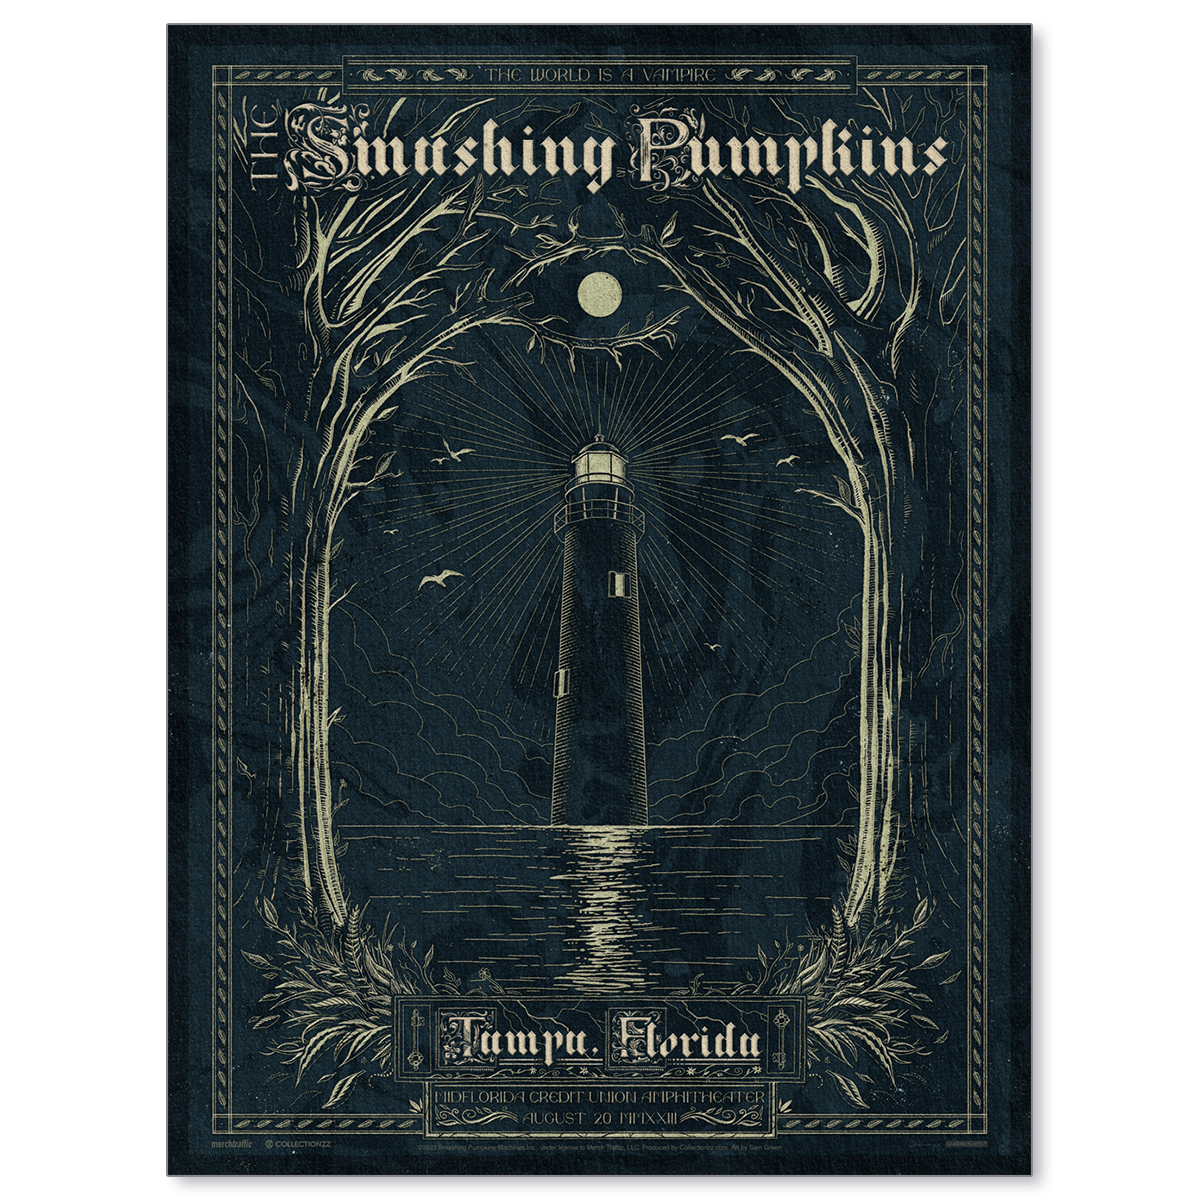 The Smashing Pumpkins Tampa August 20, 2023 Poster & Setlist Trading Card